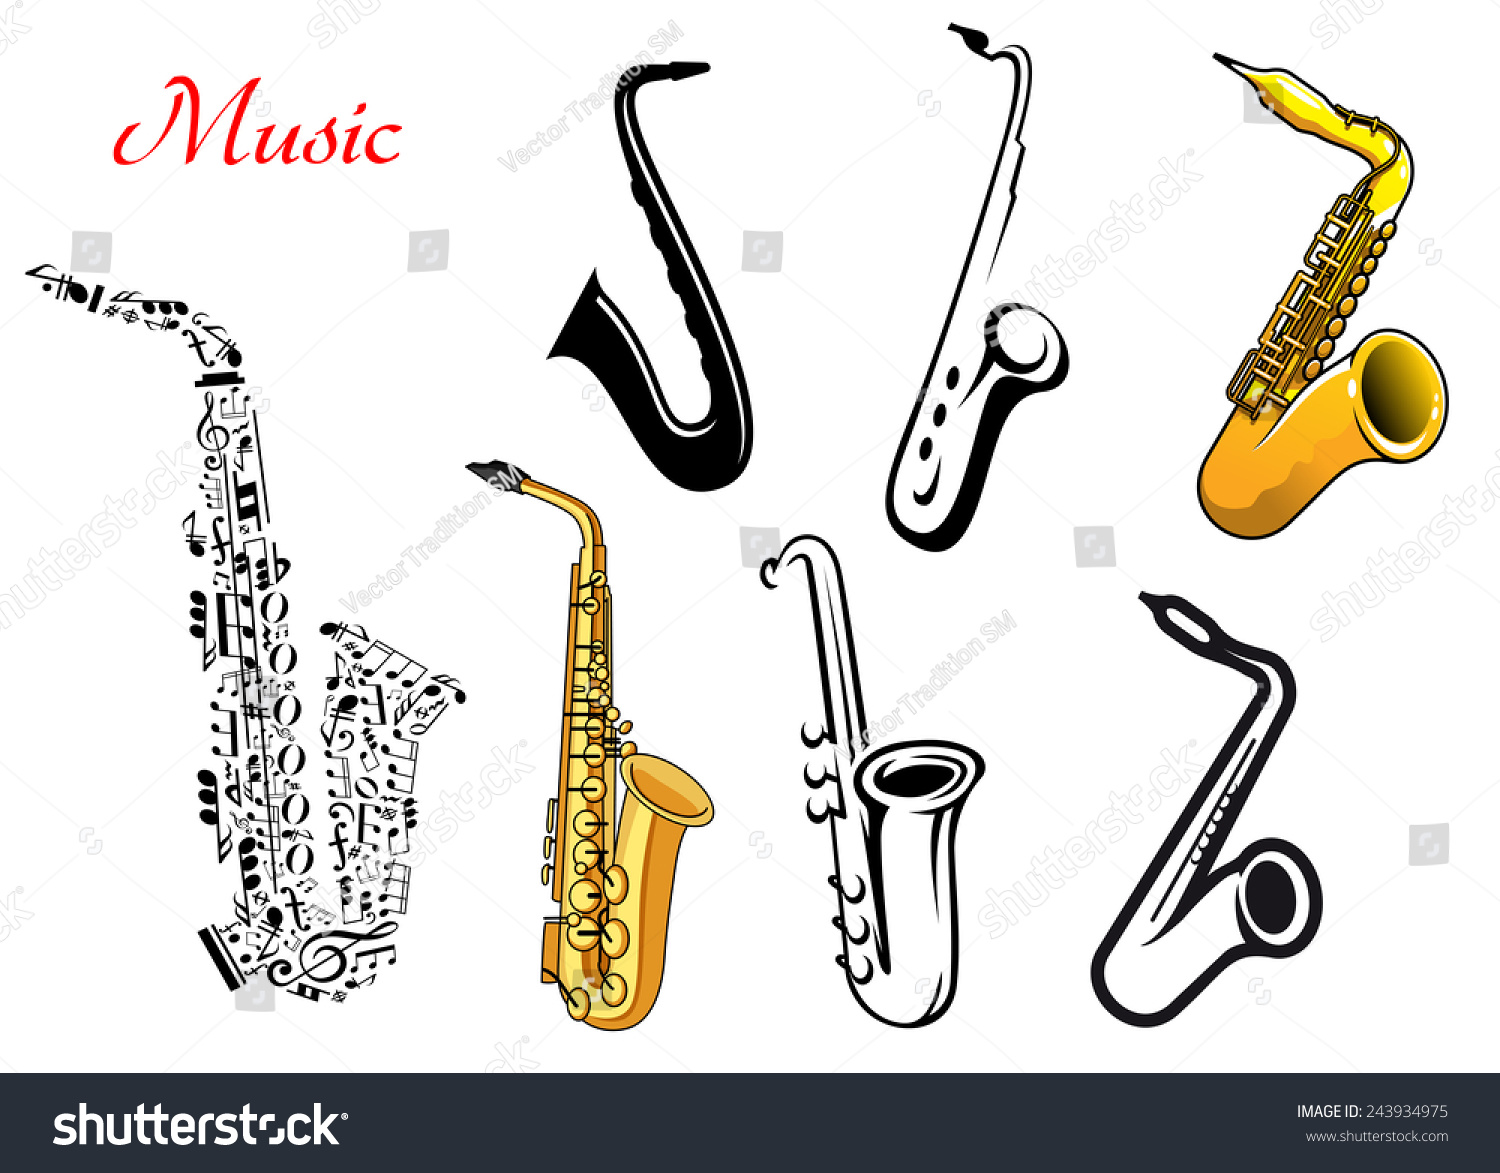 cartoon clipart of musical instruments - photo #30